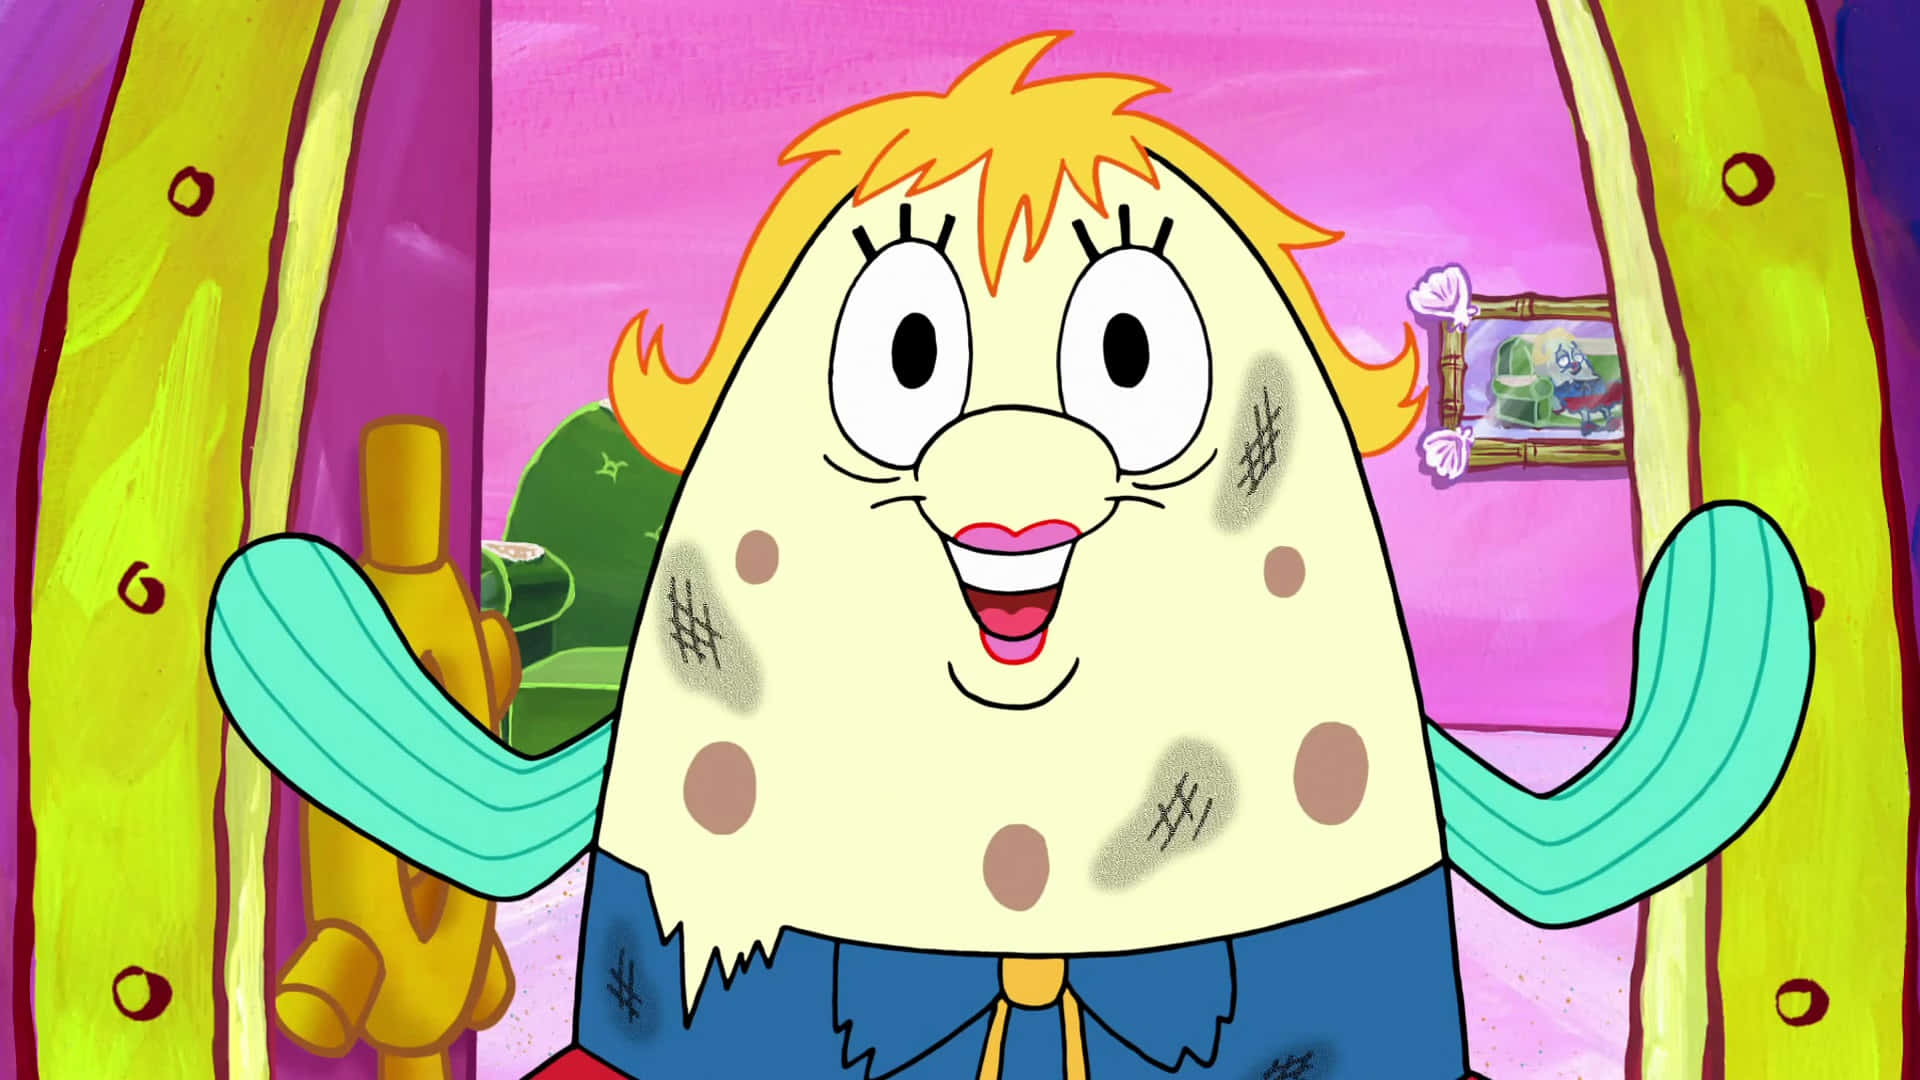 Mrs. Puff Smiling at the Boating School Wallpaper